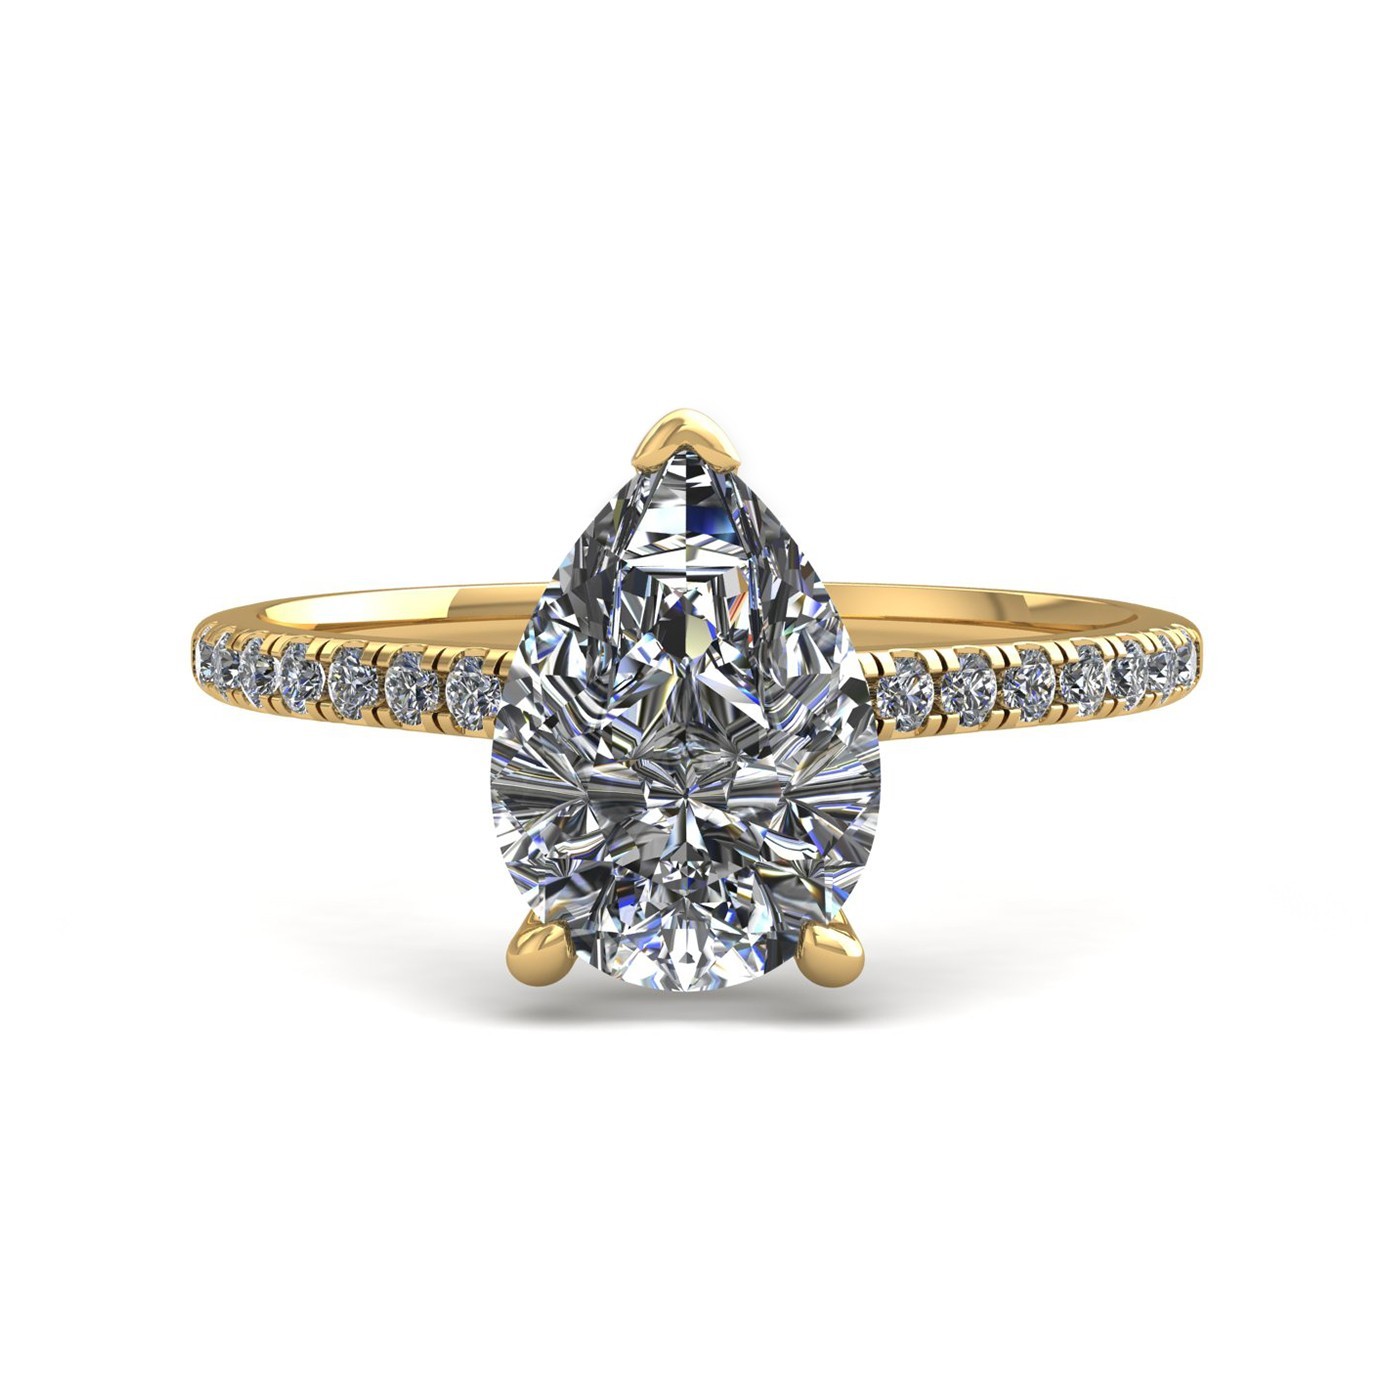 18k yellow gold  0.50ct 3 prongs pear diamond engagement ring with whisper thin pavÉ set band Photos & images